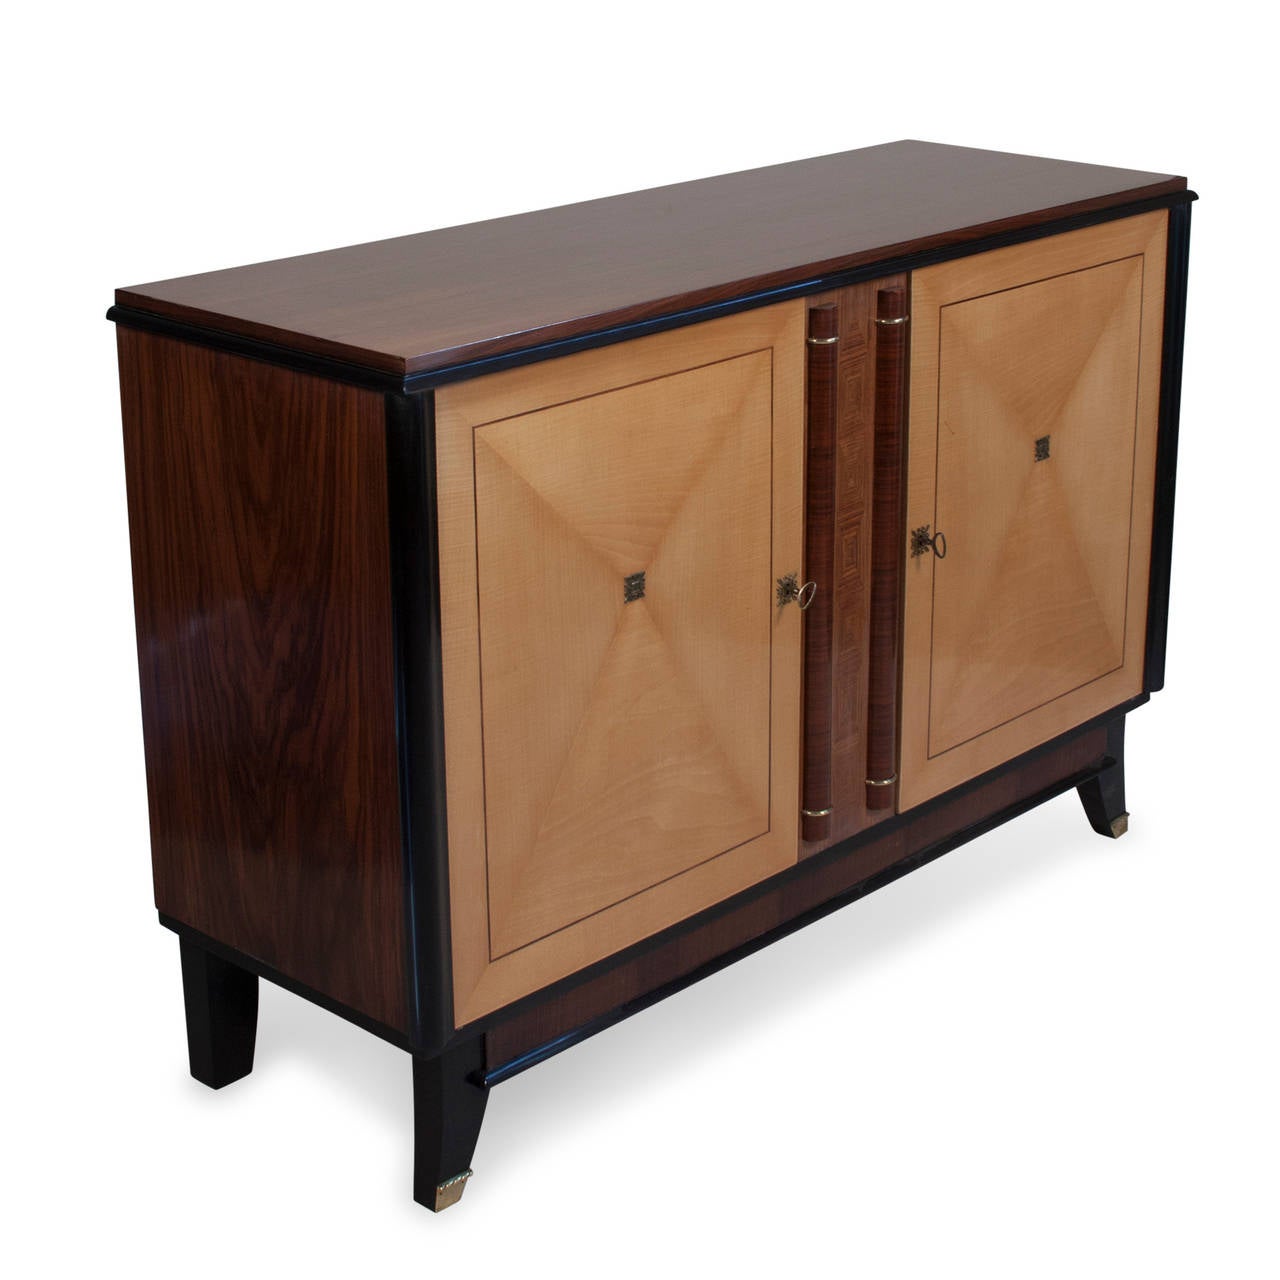 Rosewood, walnut and sycamore two-door cabinet, the sycamore door faces having matched veneer star pattern centered on brass emblem. With ebonized accents and brass keyholes, the top surface and sides beautifully grained rosewood and walnut, the